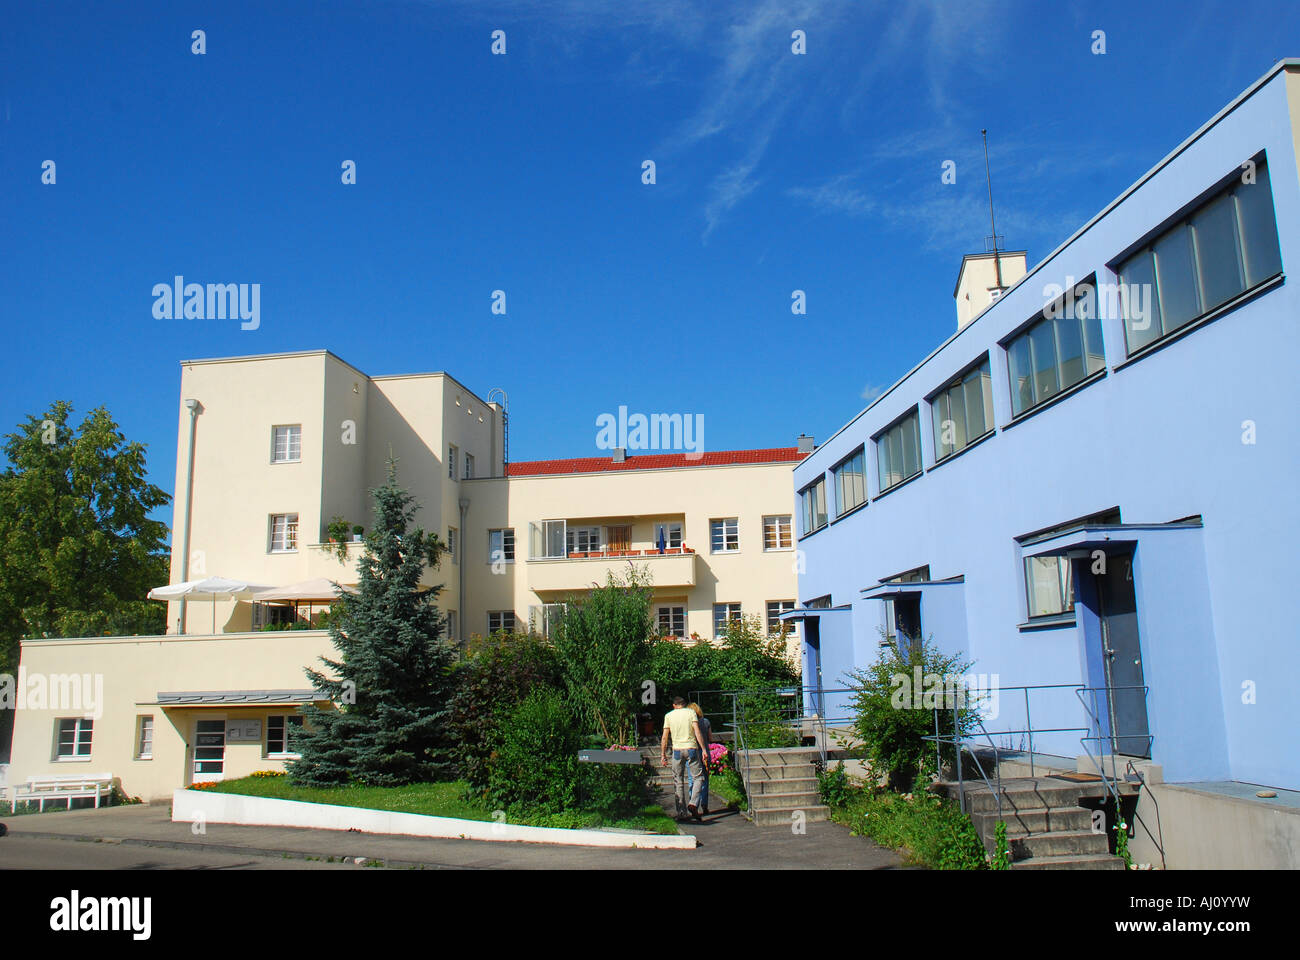 Houses of the architects Mart Stam, (Am Weissenhof 24-28) and Peter Behrens (Am Weissenhof 30-32) - architectural monument Stock Photo